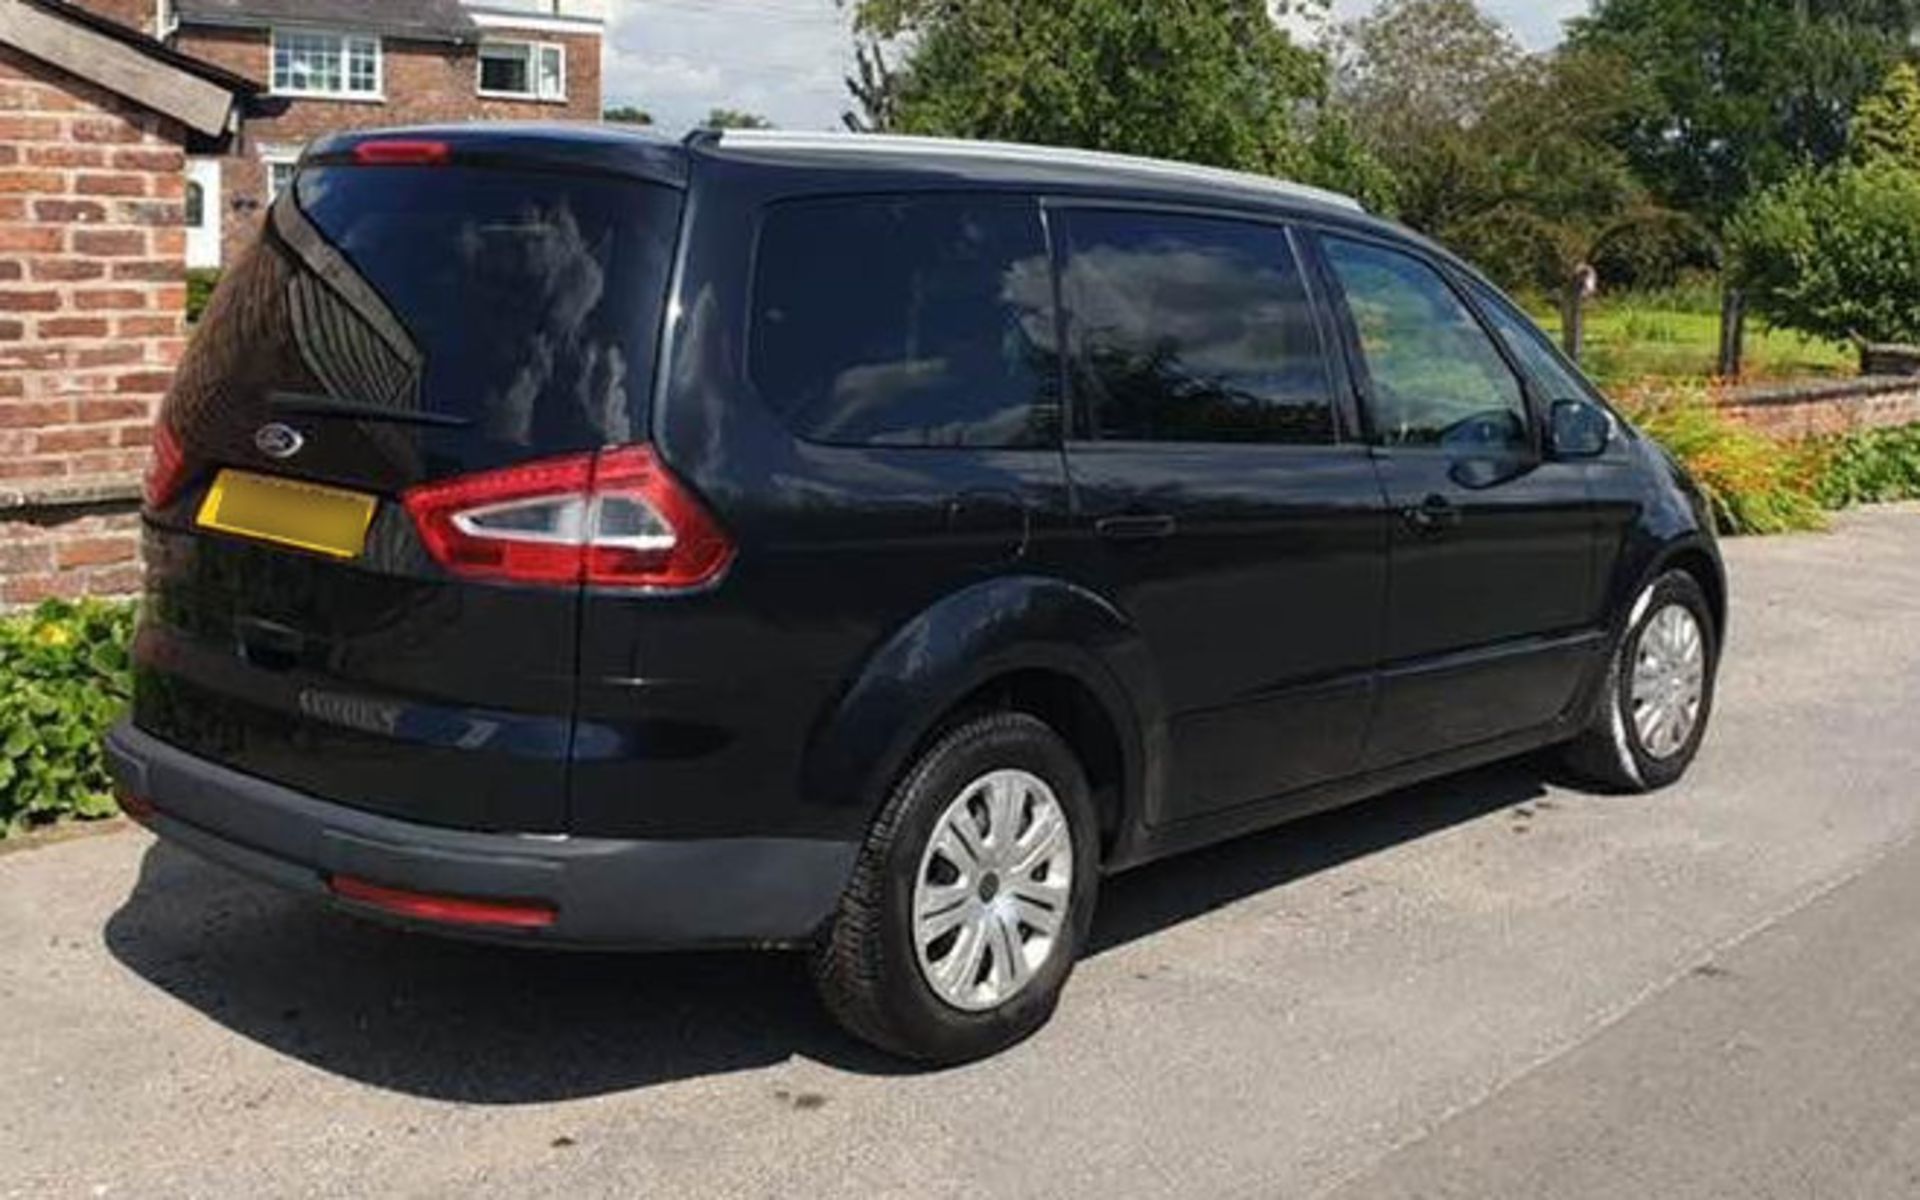 1 x 2014 Ford Galaxy 7-Seater Diesel MPV - Automatic - Black - 126000 Miles - CL331 - Location: - Image 7 of 9